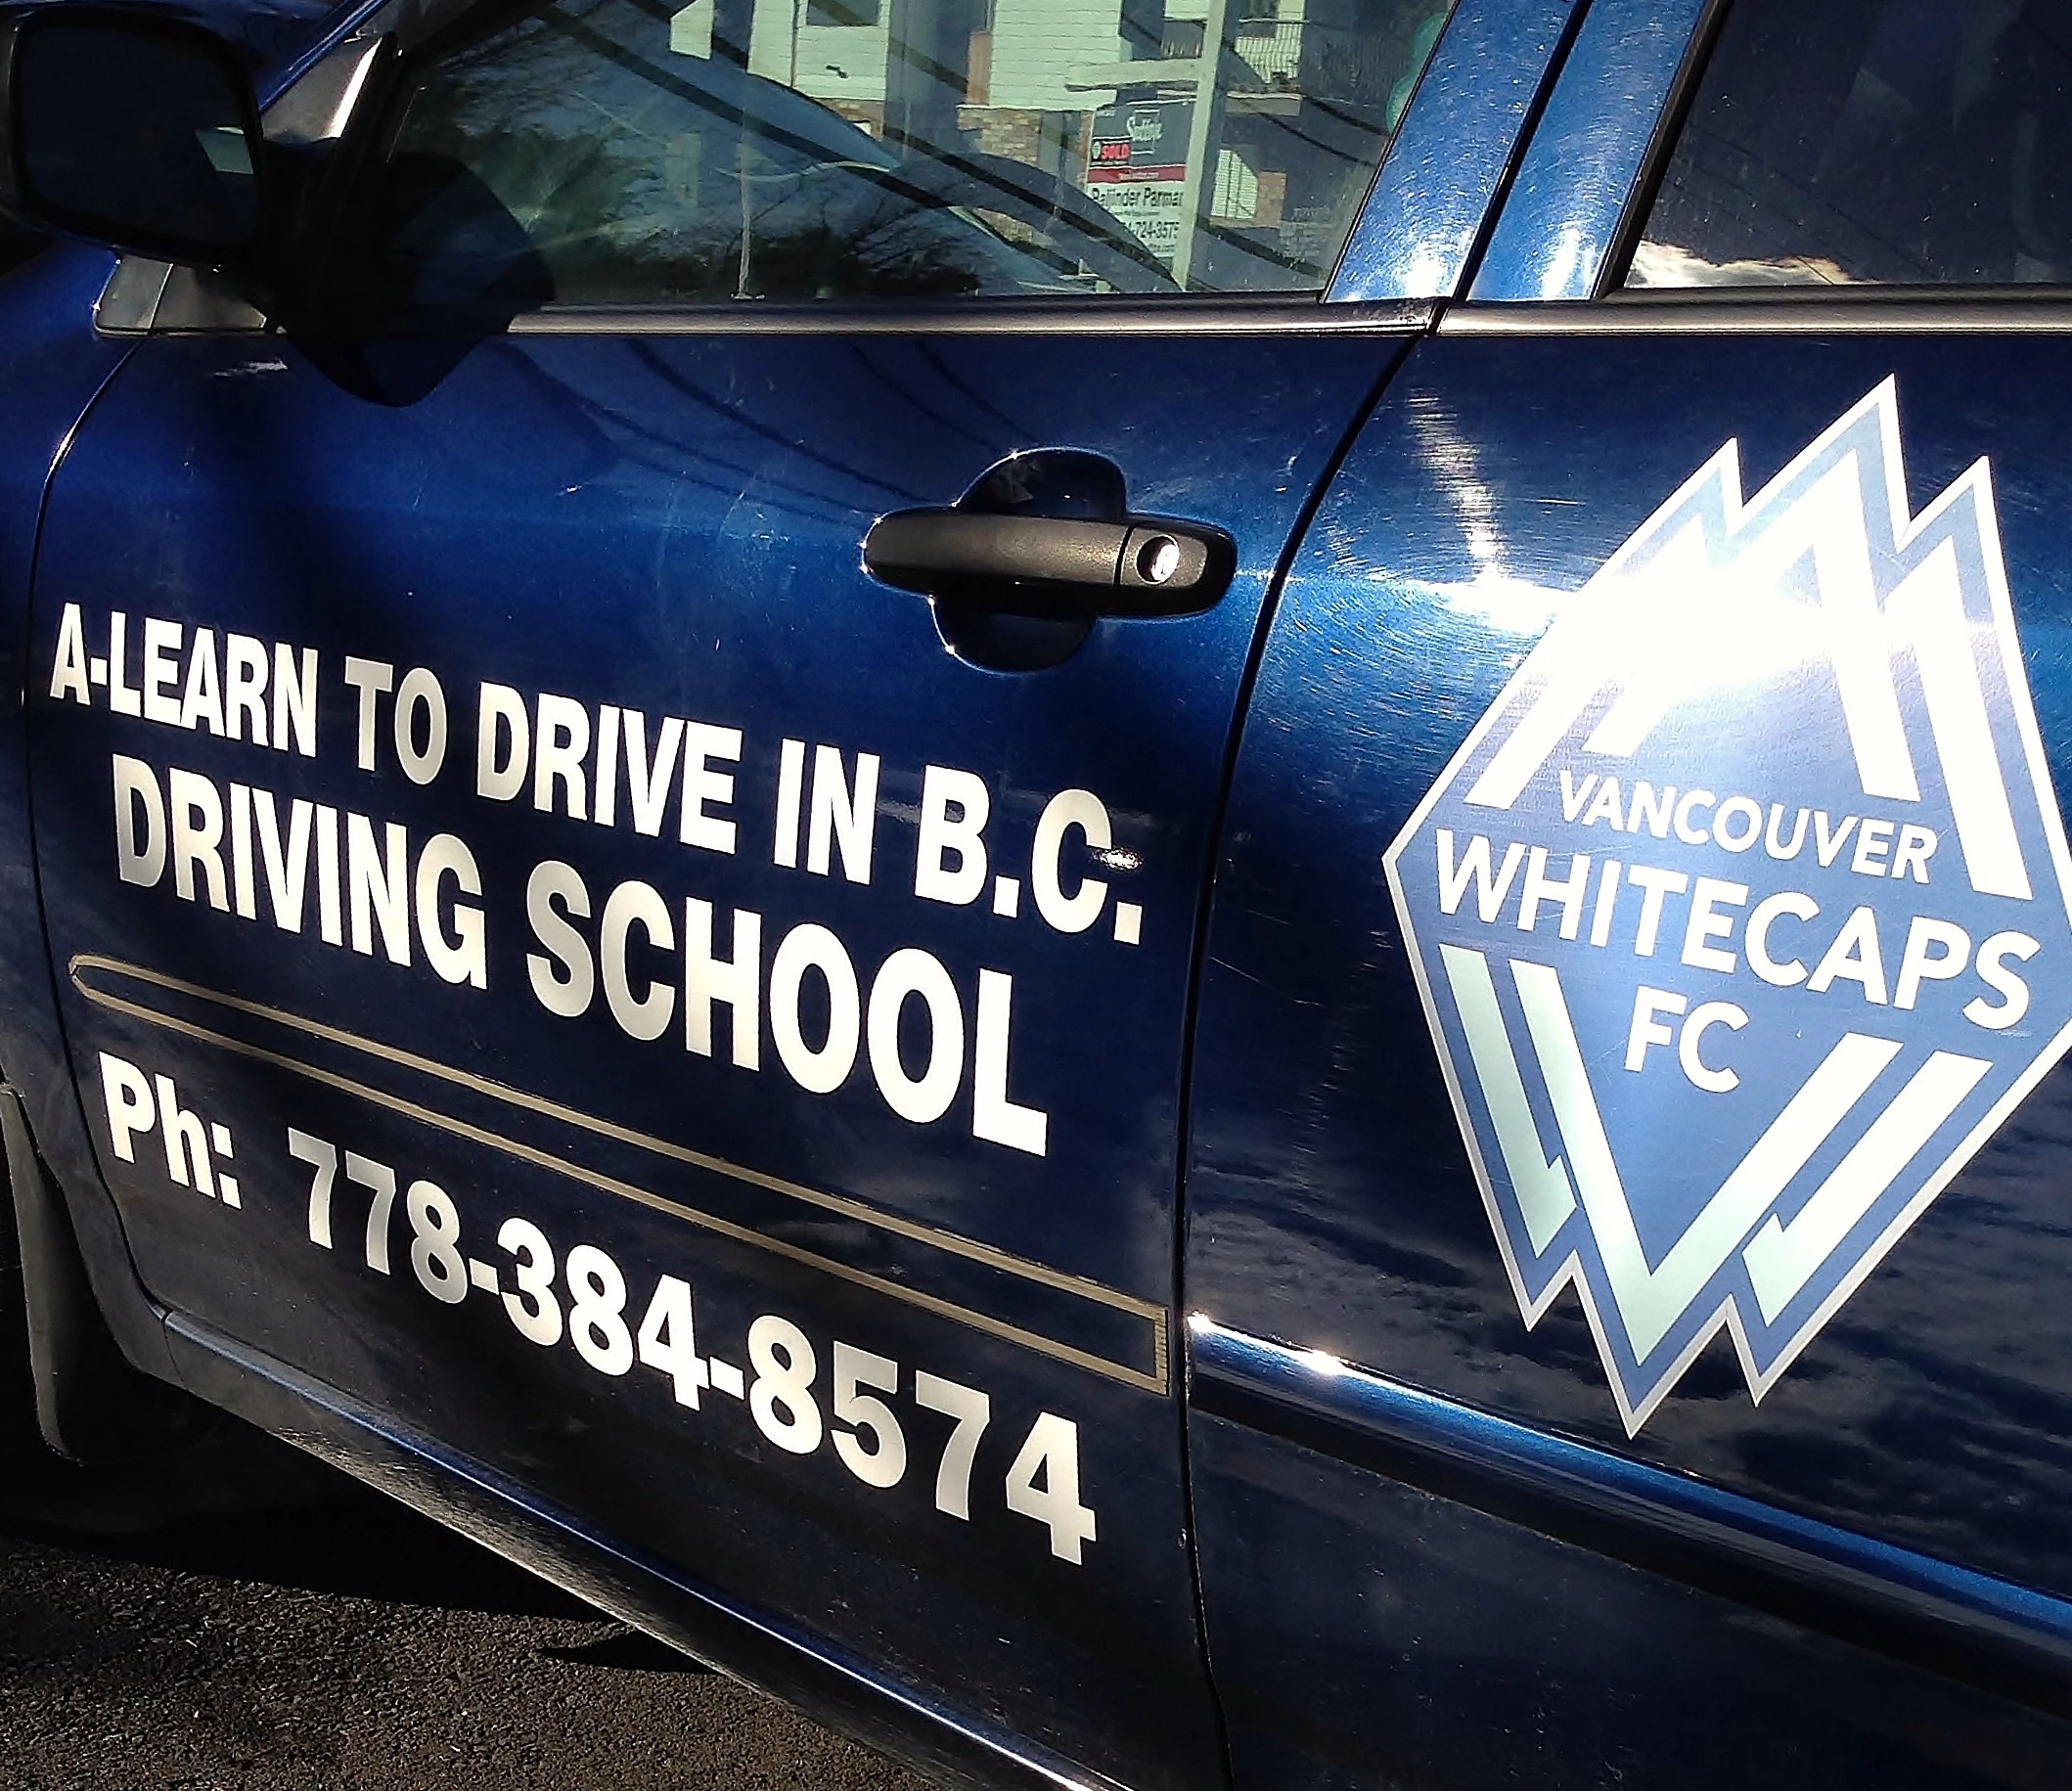 A-Learn To Drive In BC